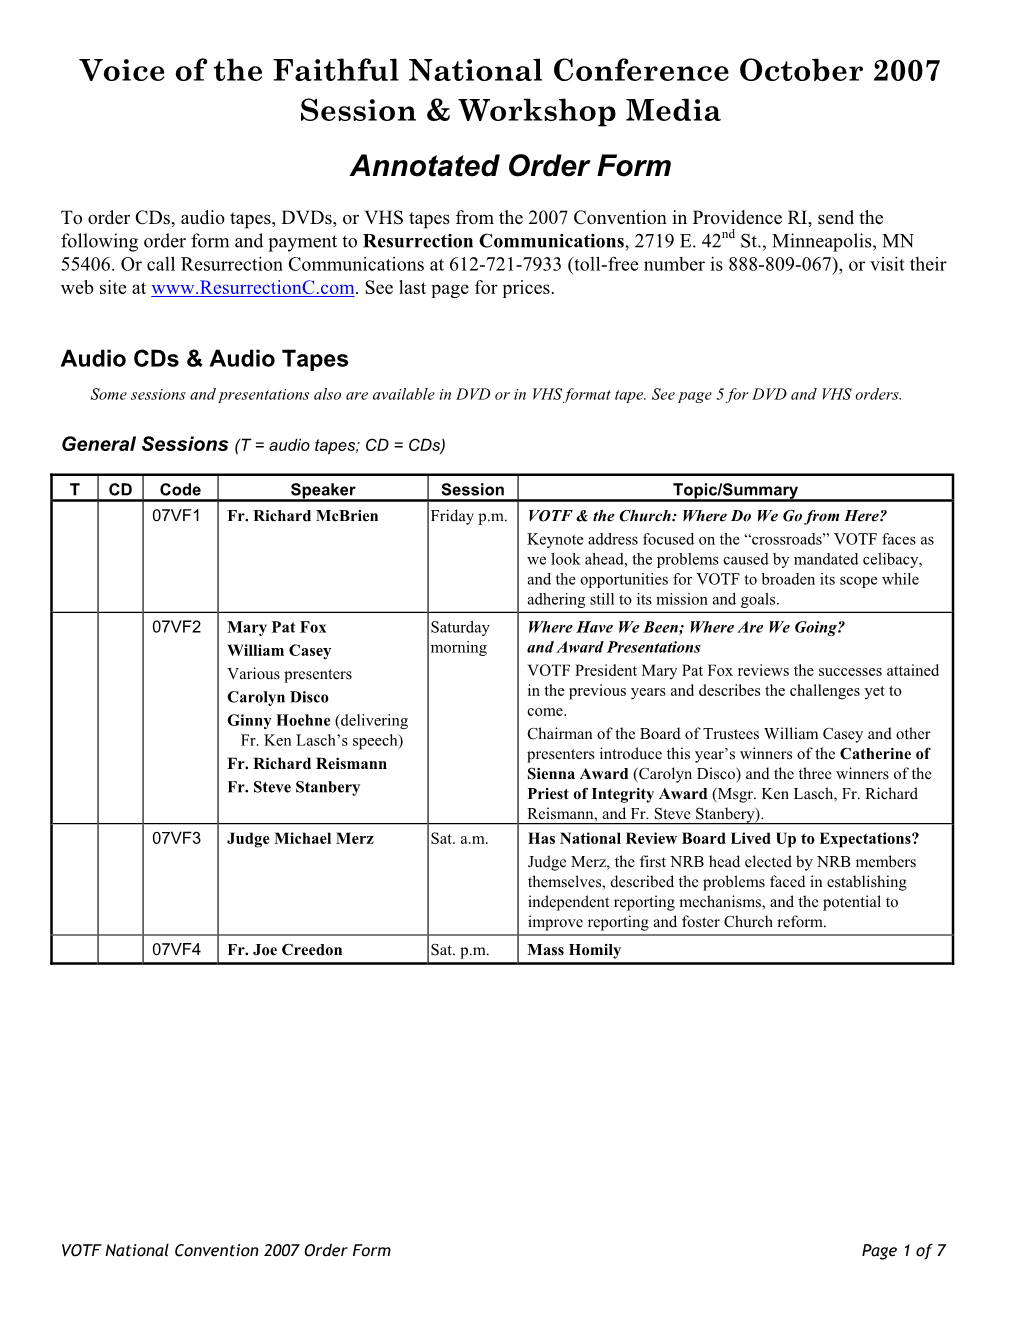 Voice of the Faithful National Conference October 2007 Session & Workshop Media Annotated Order Form